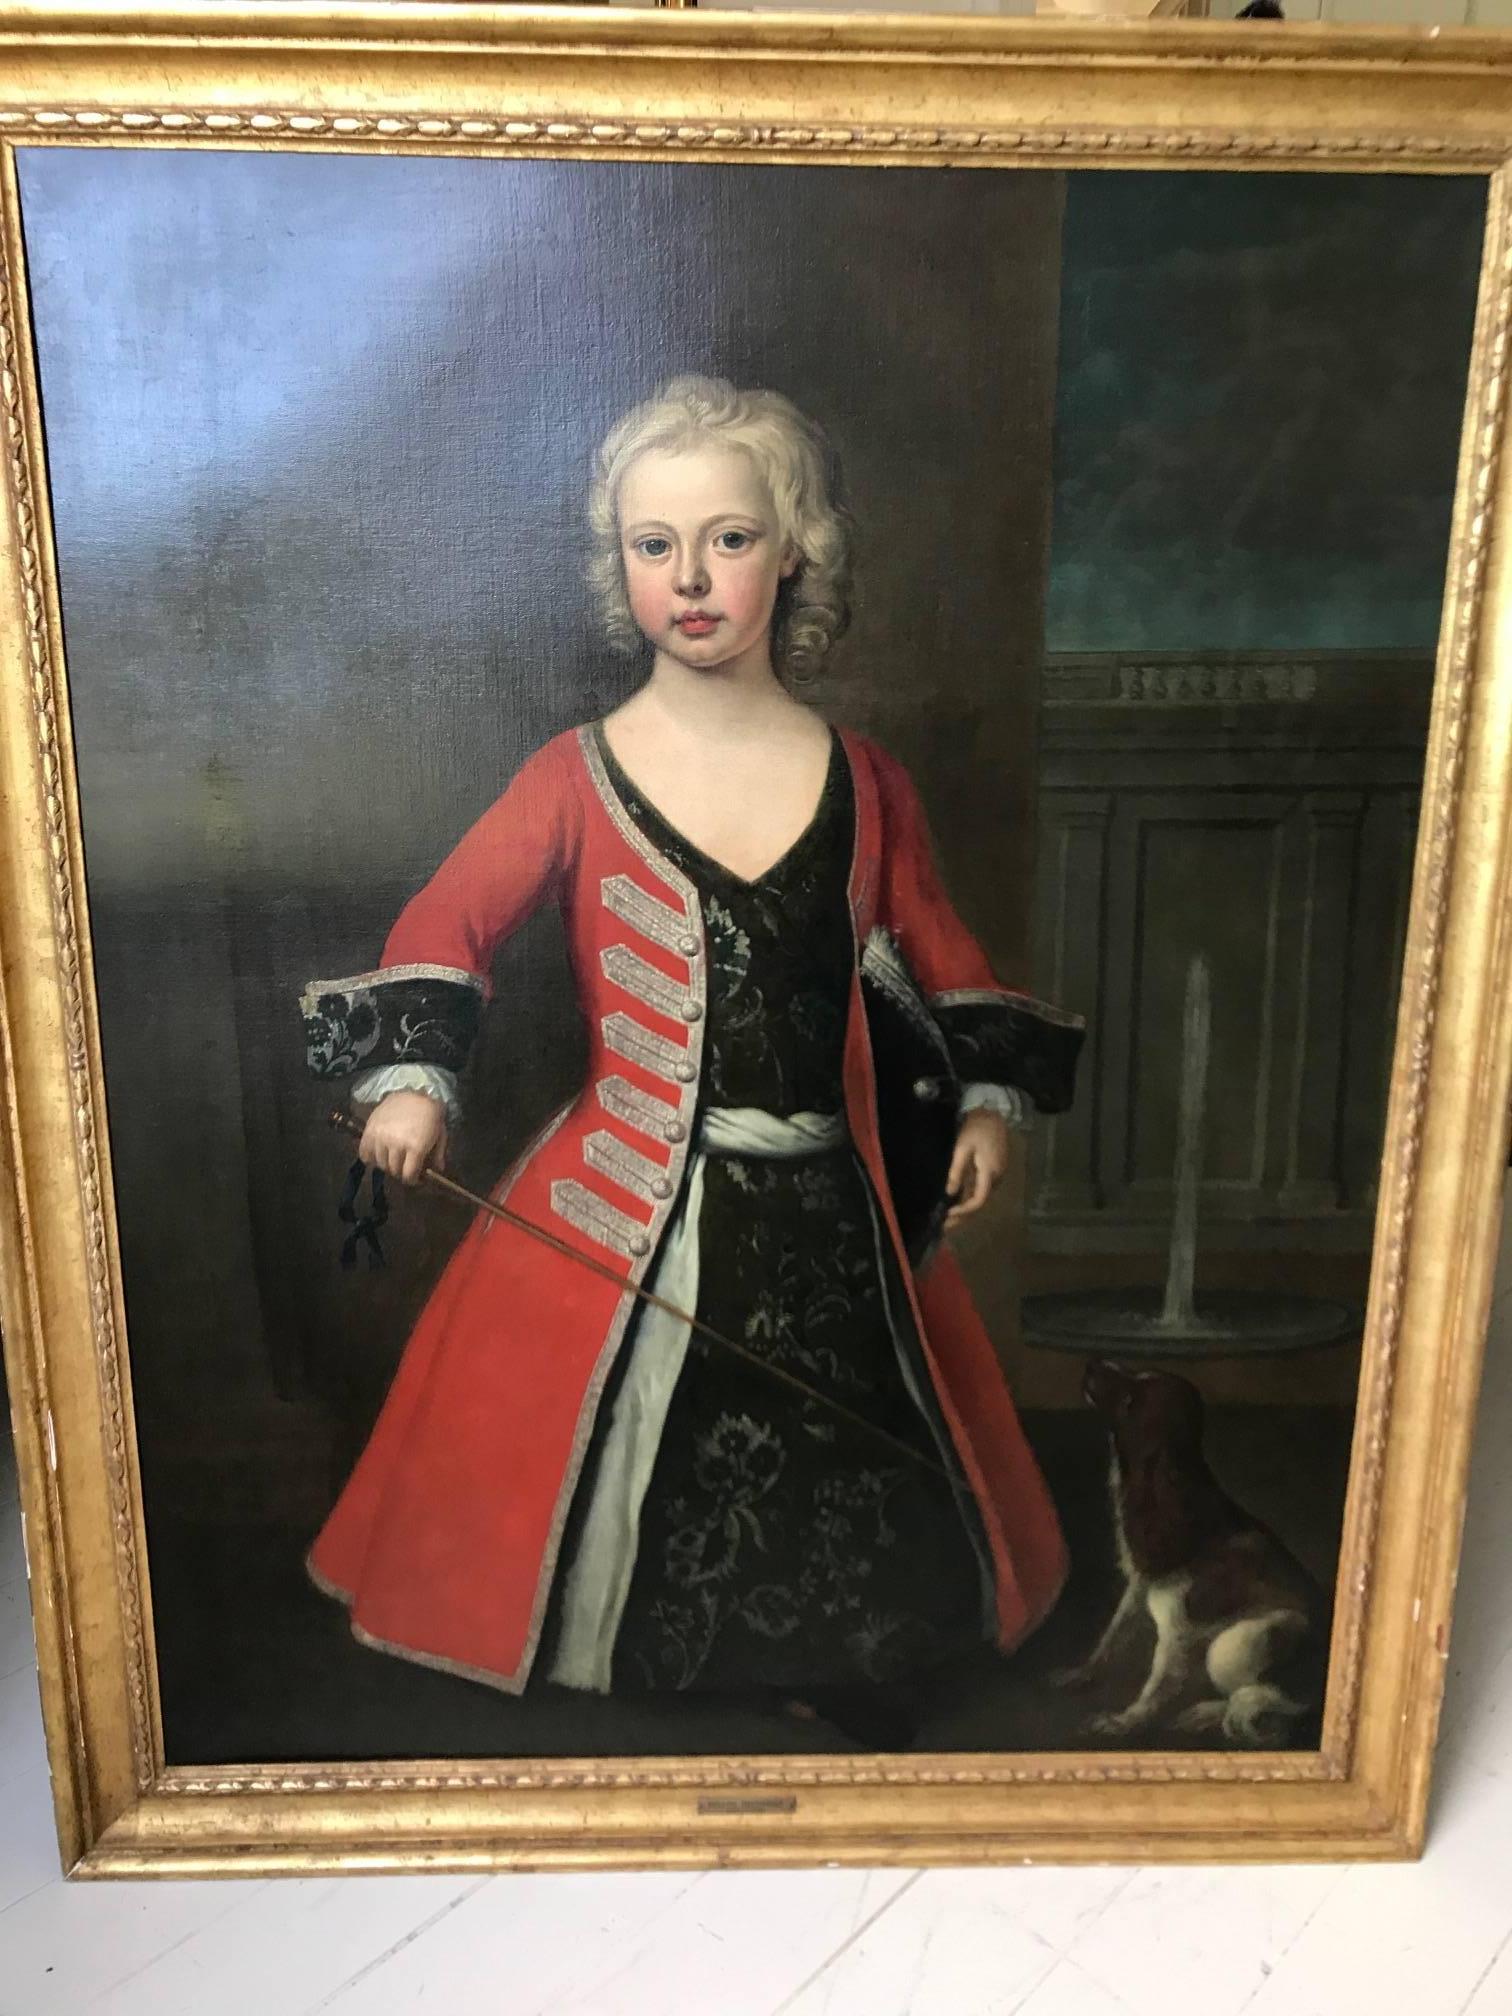 A portrait of prince William son of king George II. Oil on canvas painted by the Joseph Highmore.
Depicting William as a young boy, in military dress. He appears to be brandishing a fencing sward or large riding crop with his faithful dog at his